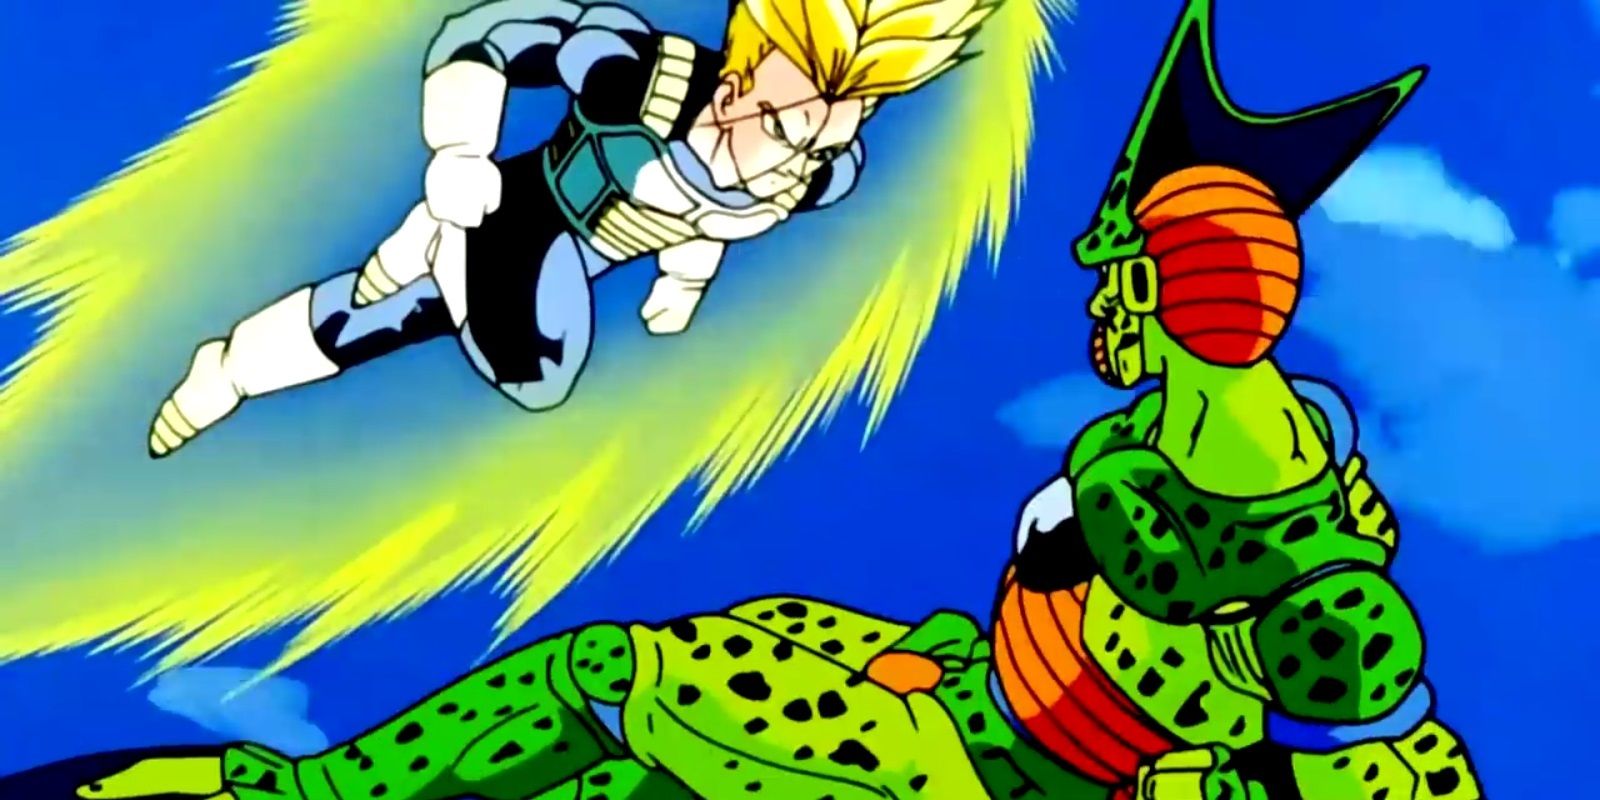 Future Trunks kills Imperfect Cell in Dragon Ball Z